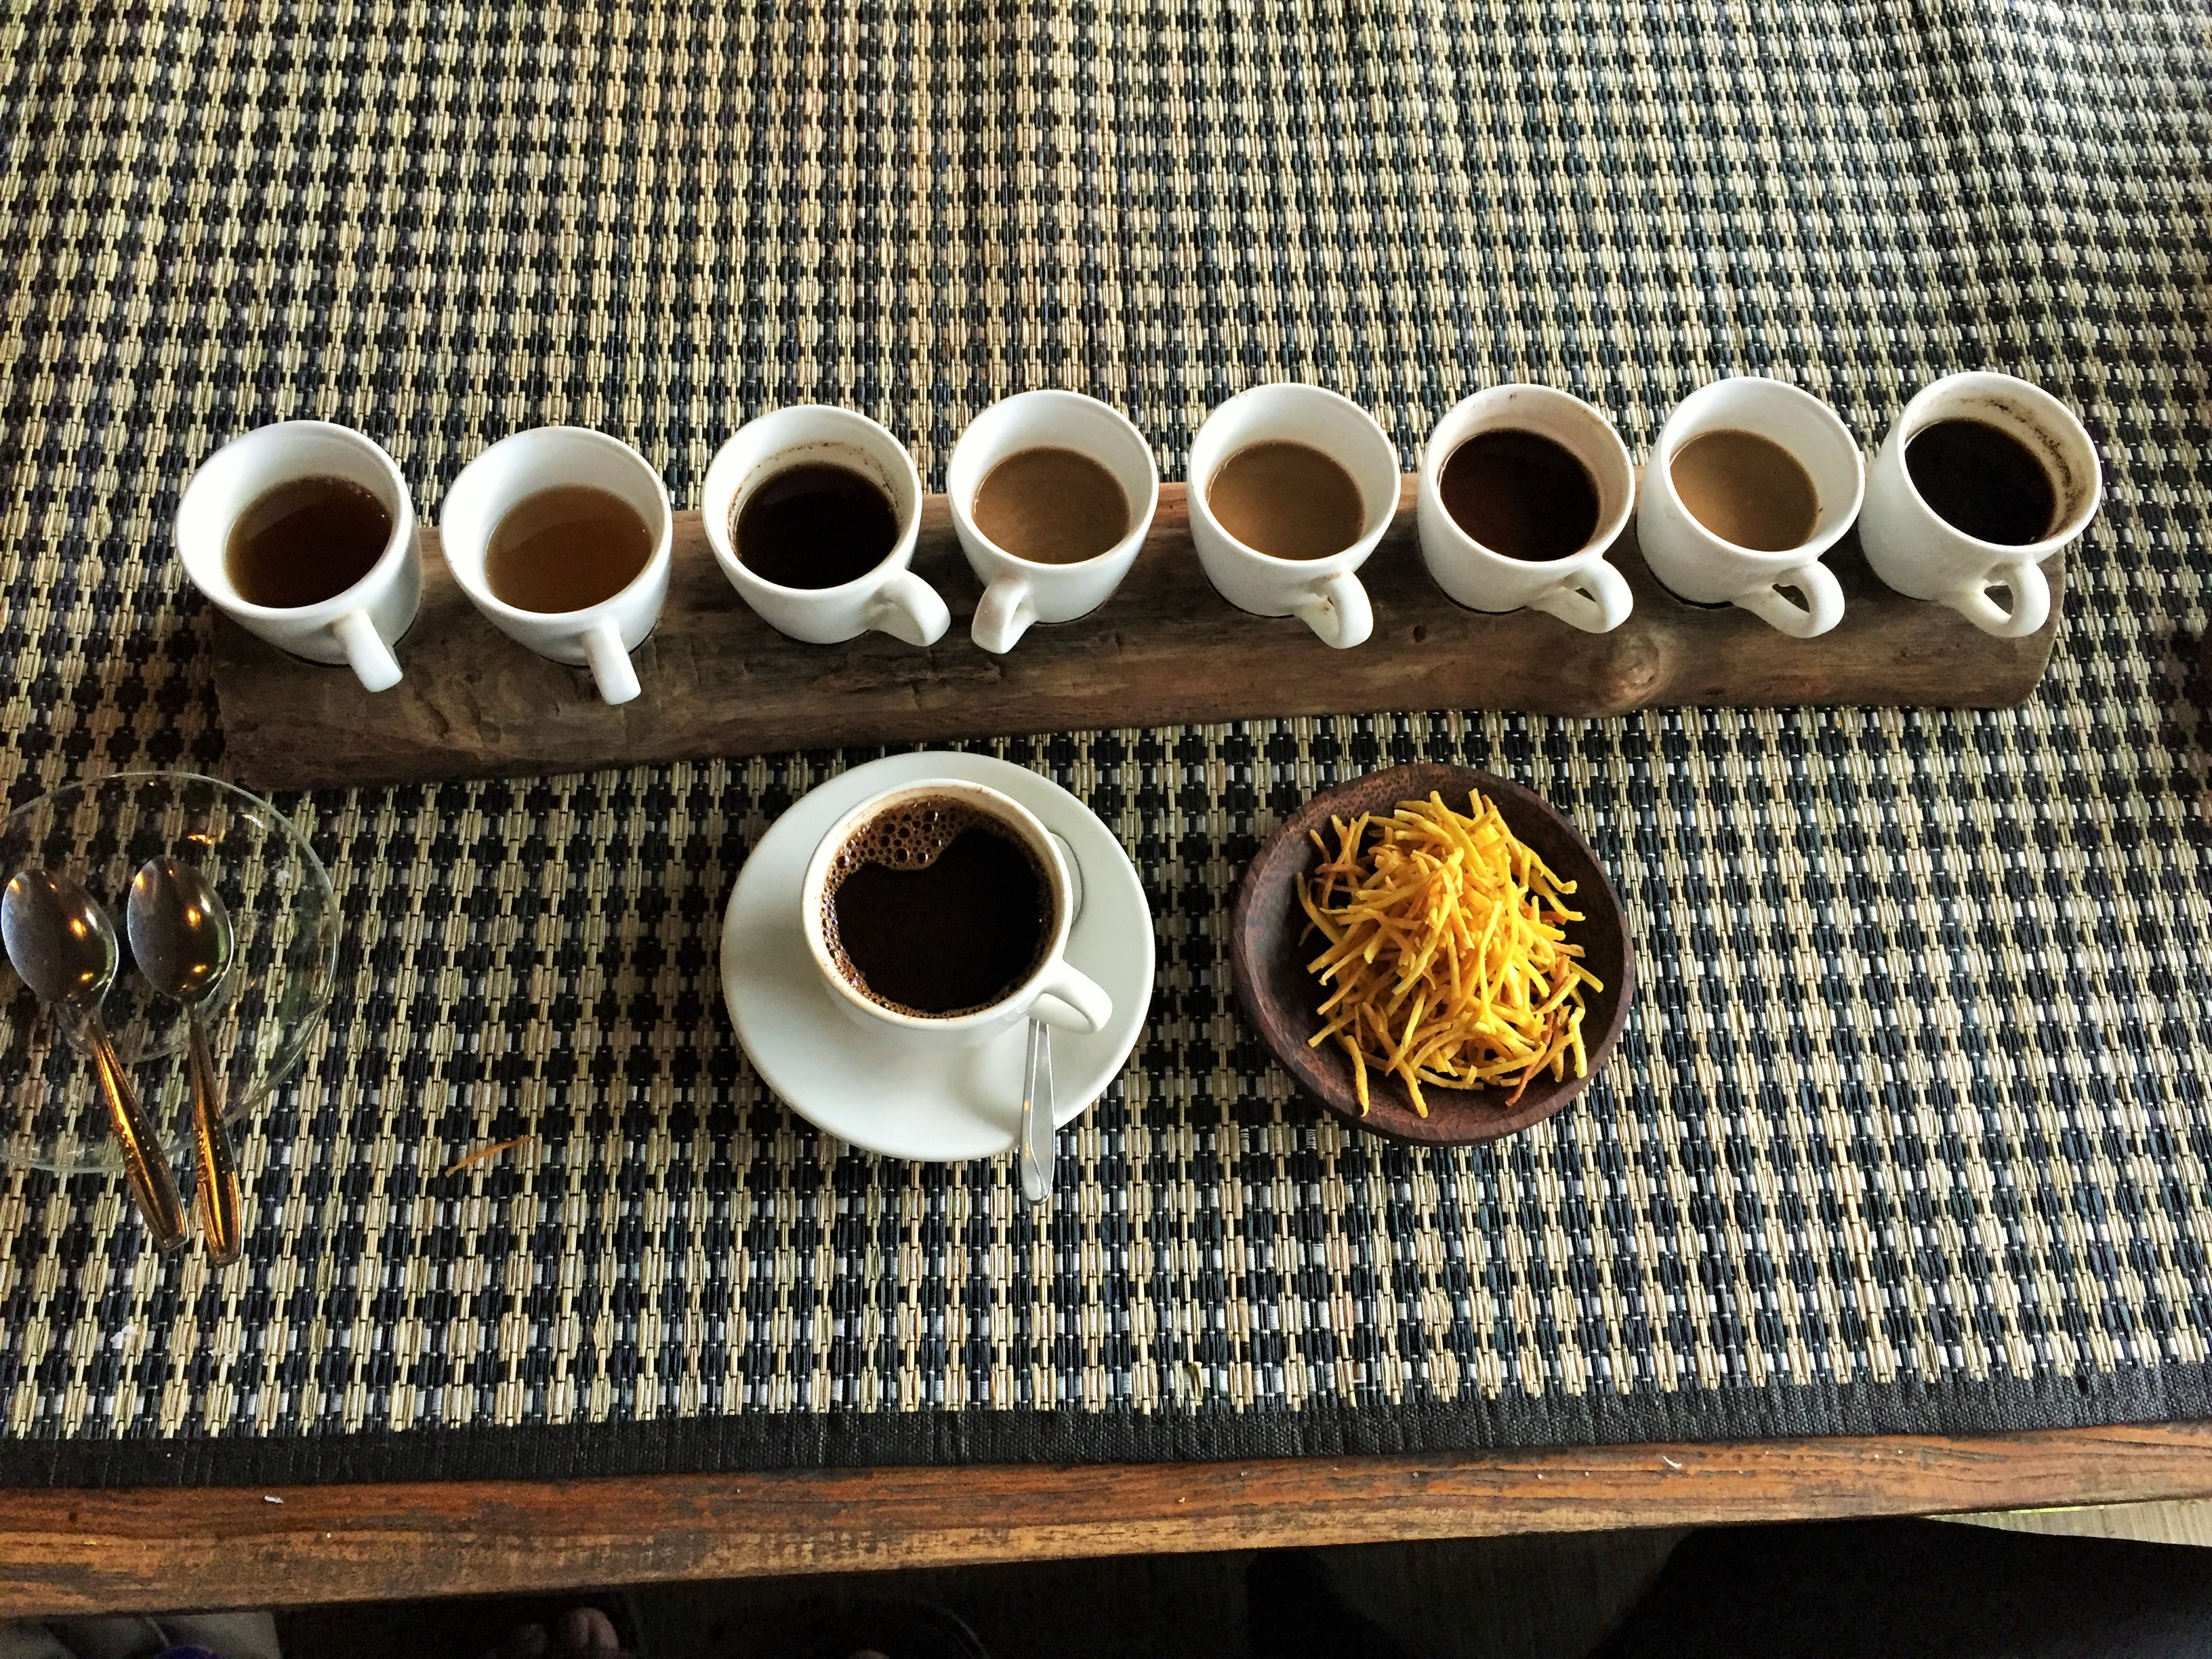 Kopi Luwak – “The most expensive coffee in the world”